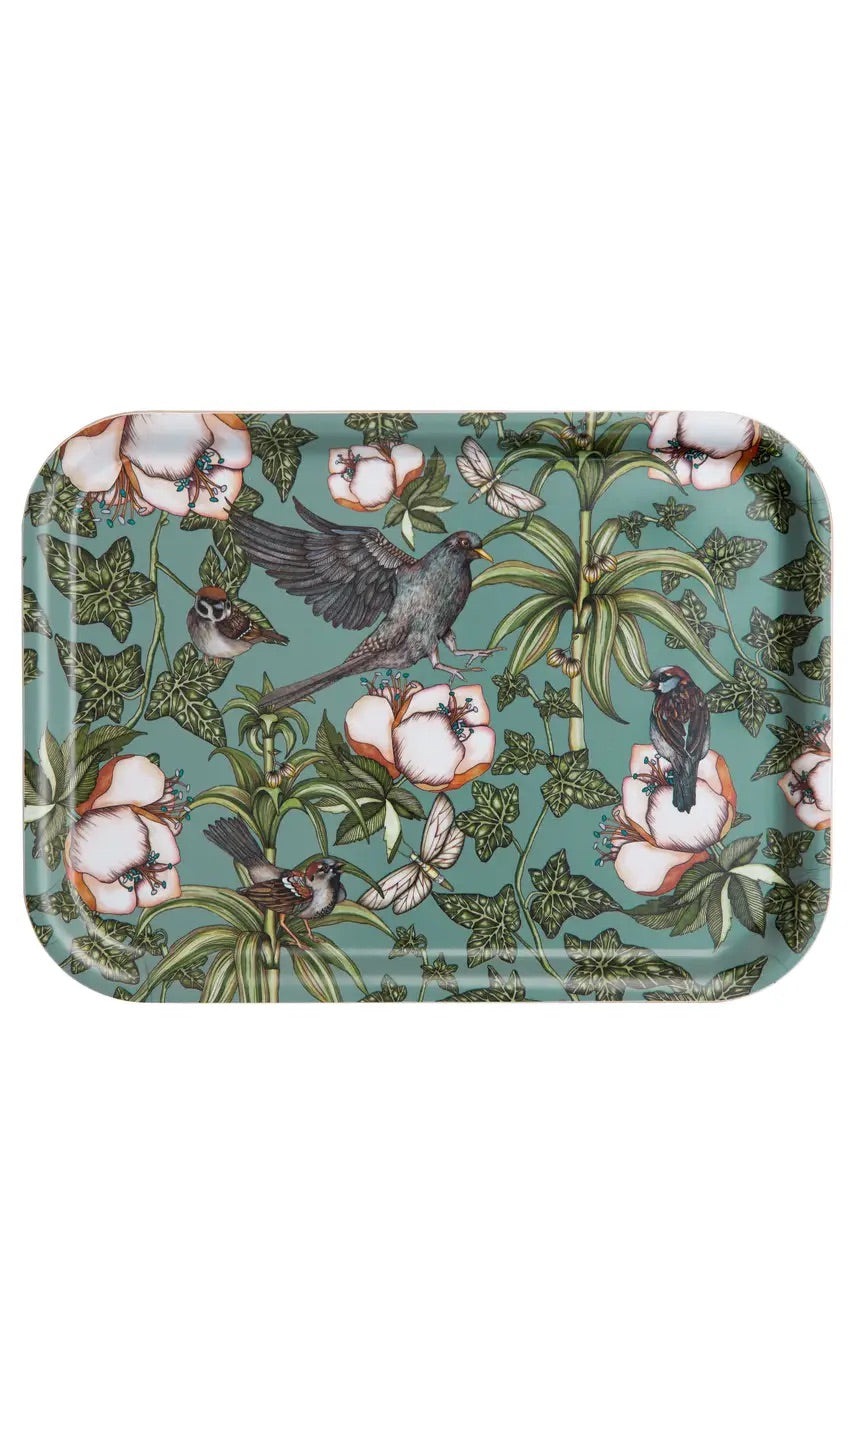 Serving Tray- The Ivy Tray 11x8 (27x 20 cm)